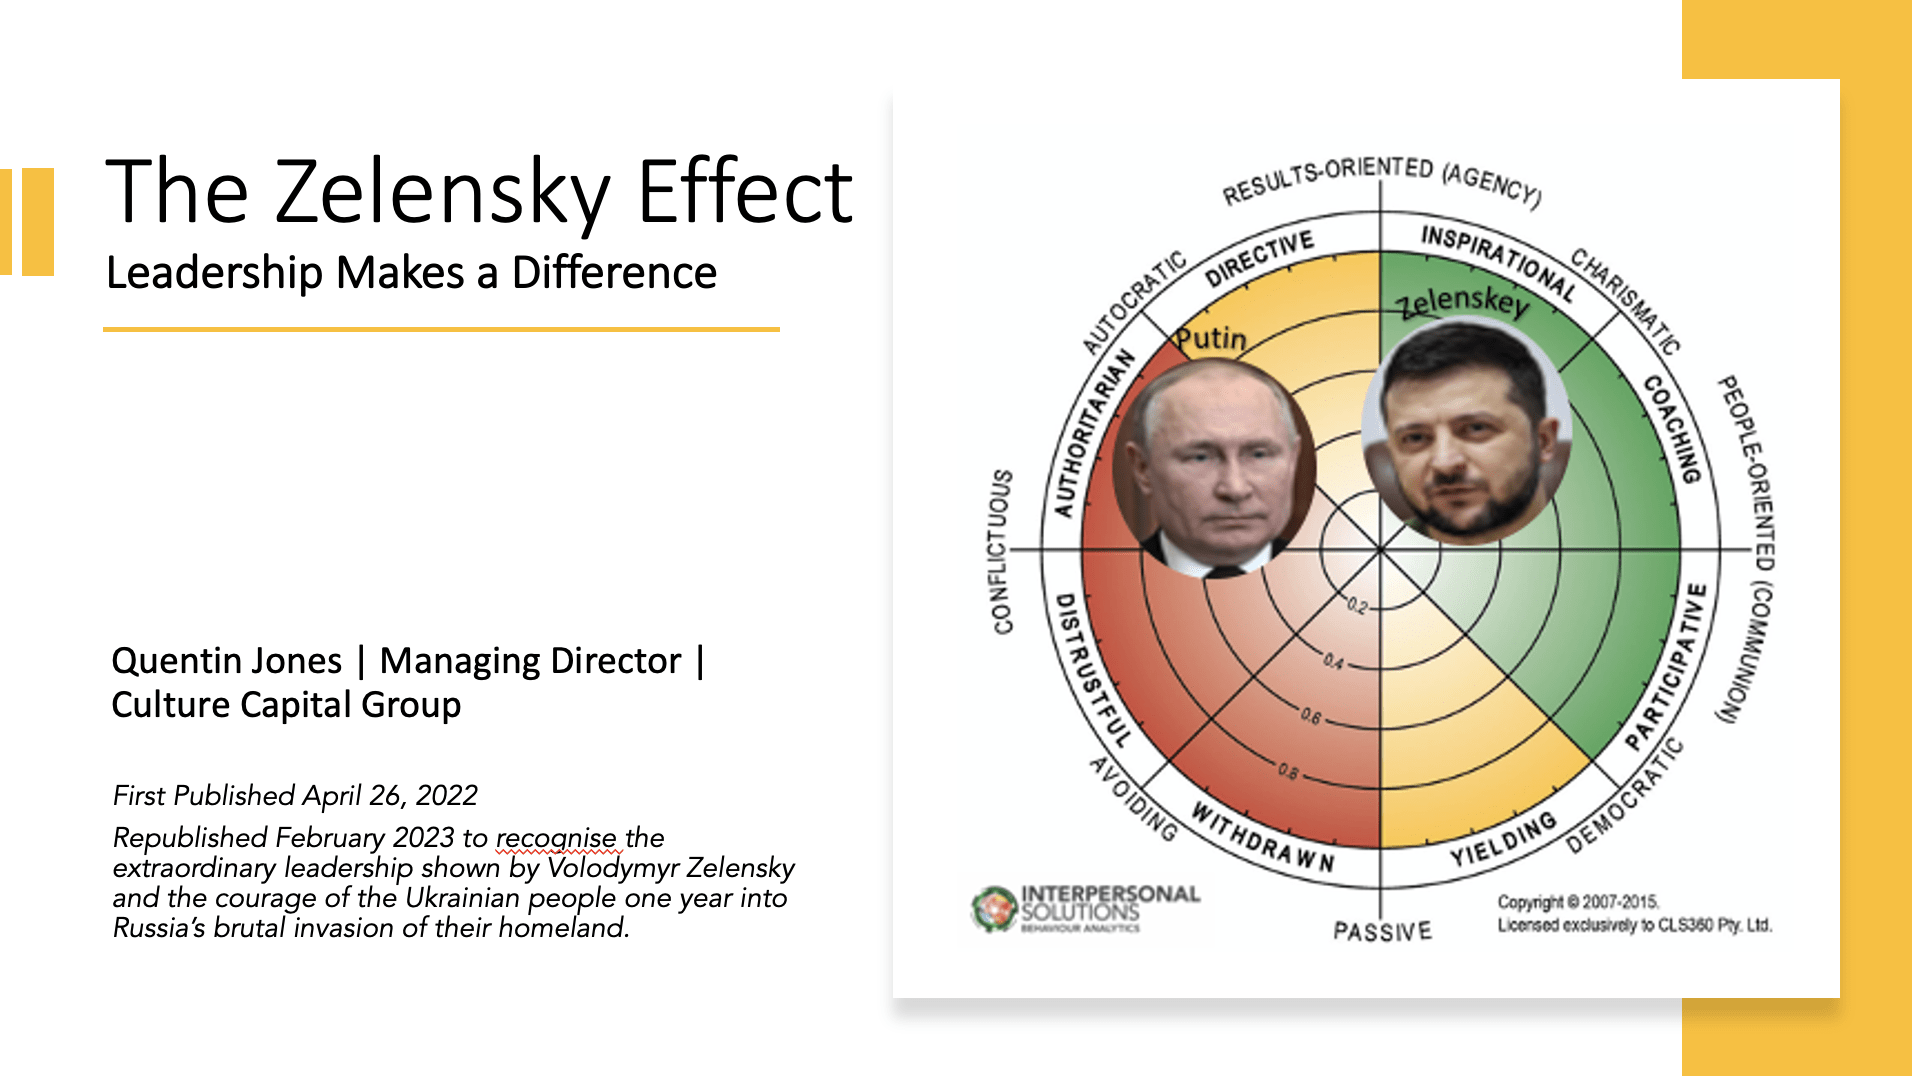 The Zelensky Effect – Leadership Makes a Difference